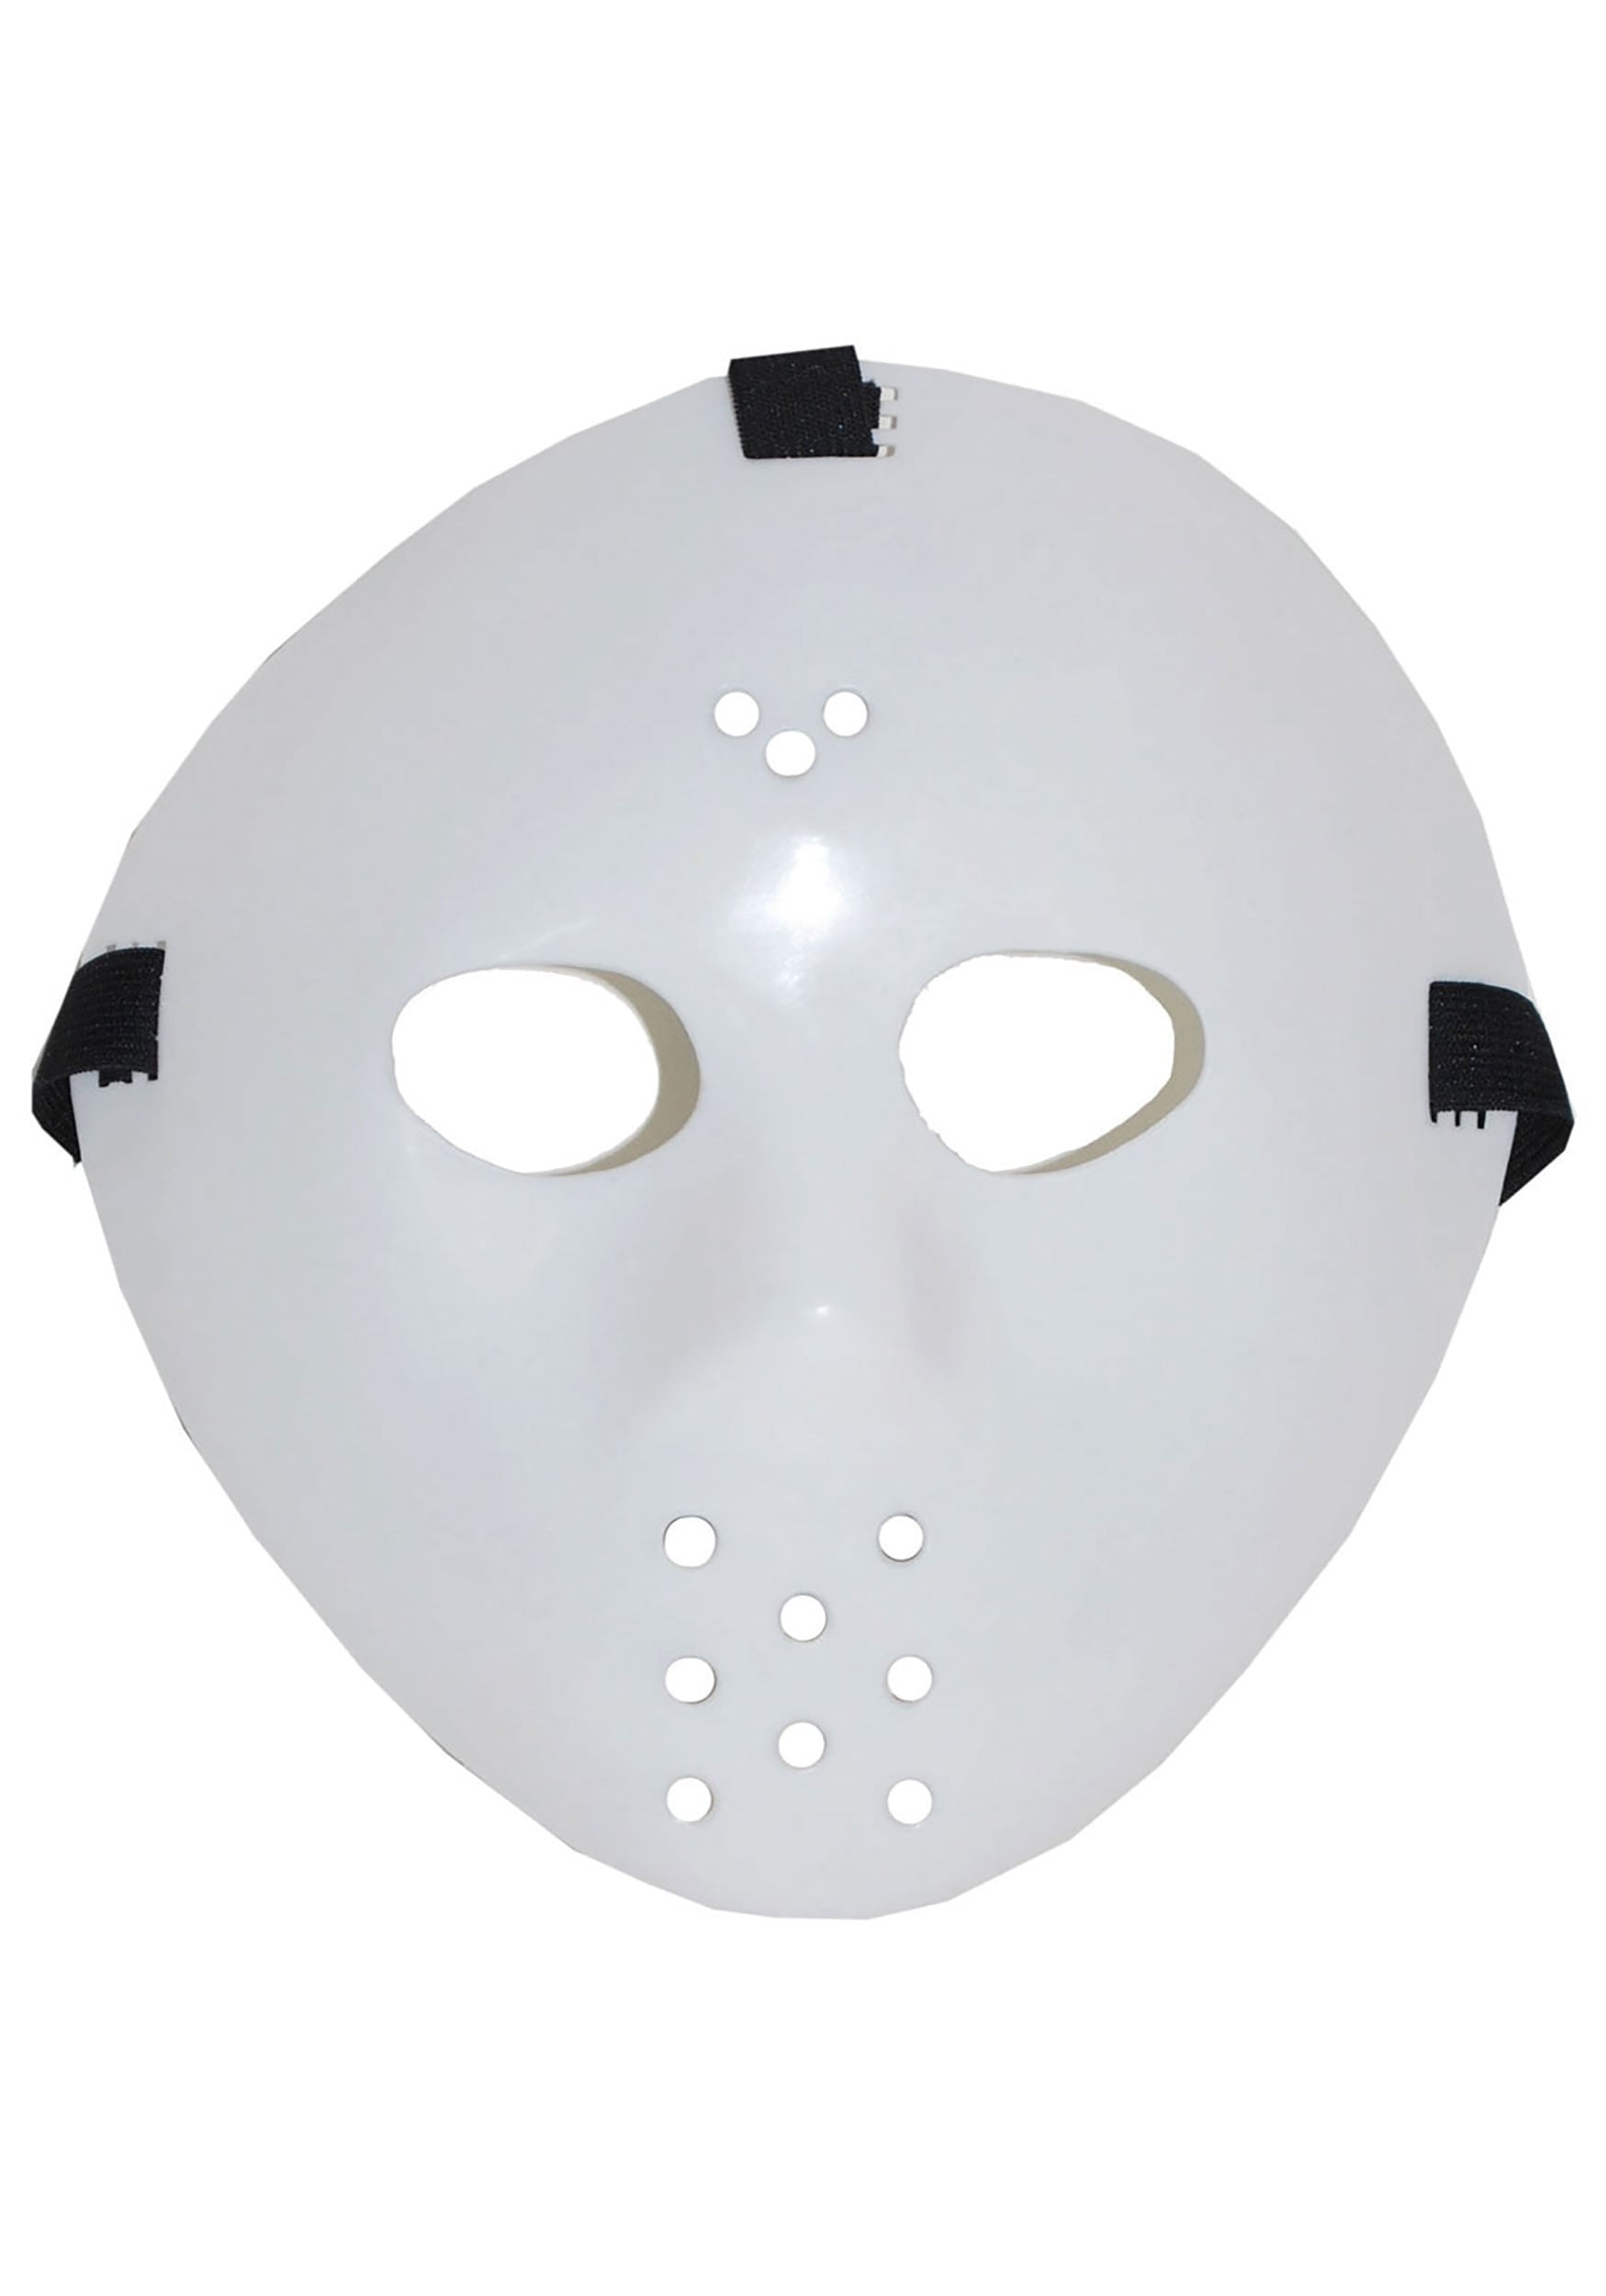 Jason Voorhees Friday the 13th in the Mask - Walmart.com